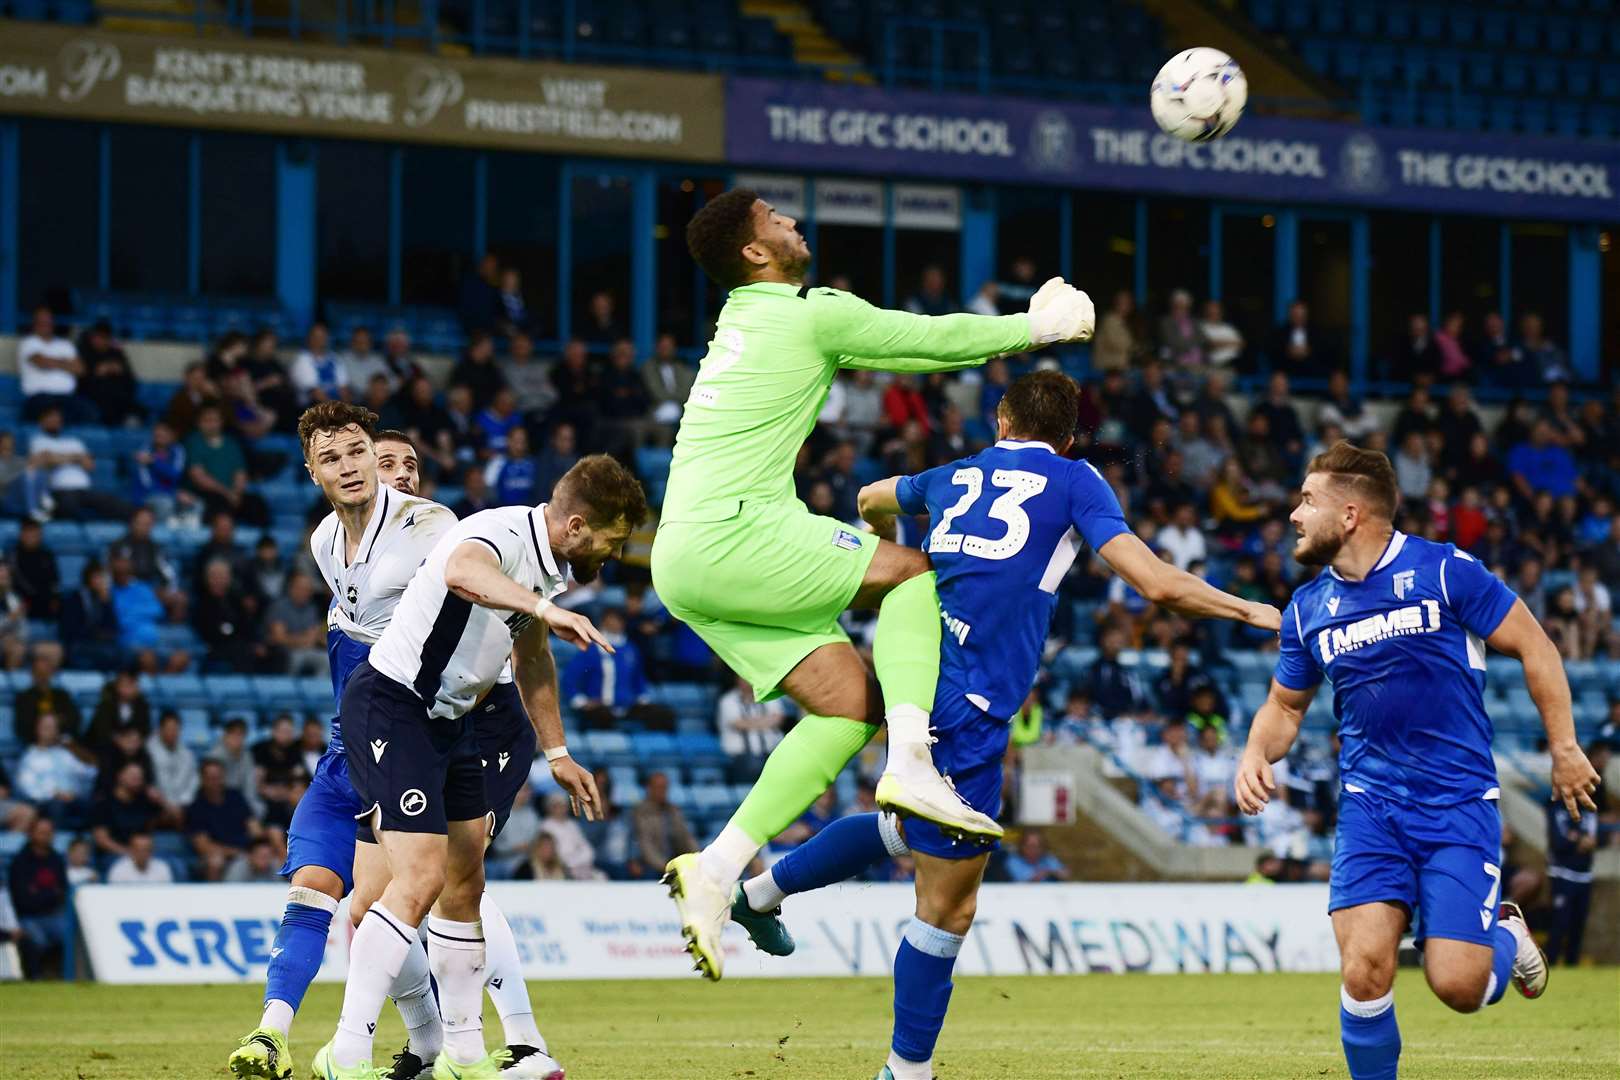 Gillingham under pressure in the second half Picture: Barry Goodwin